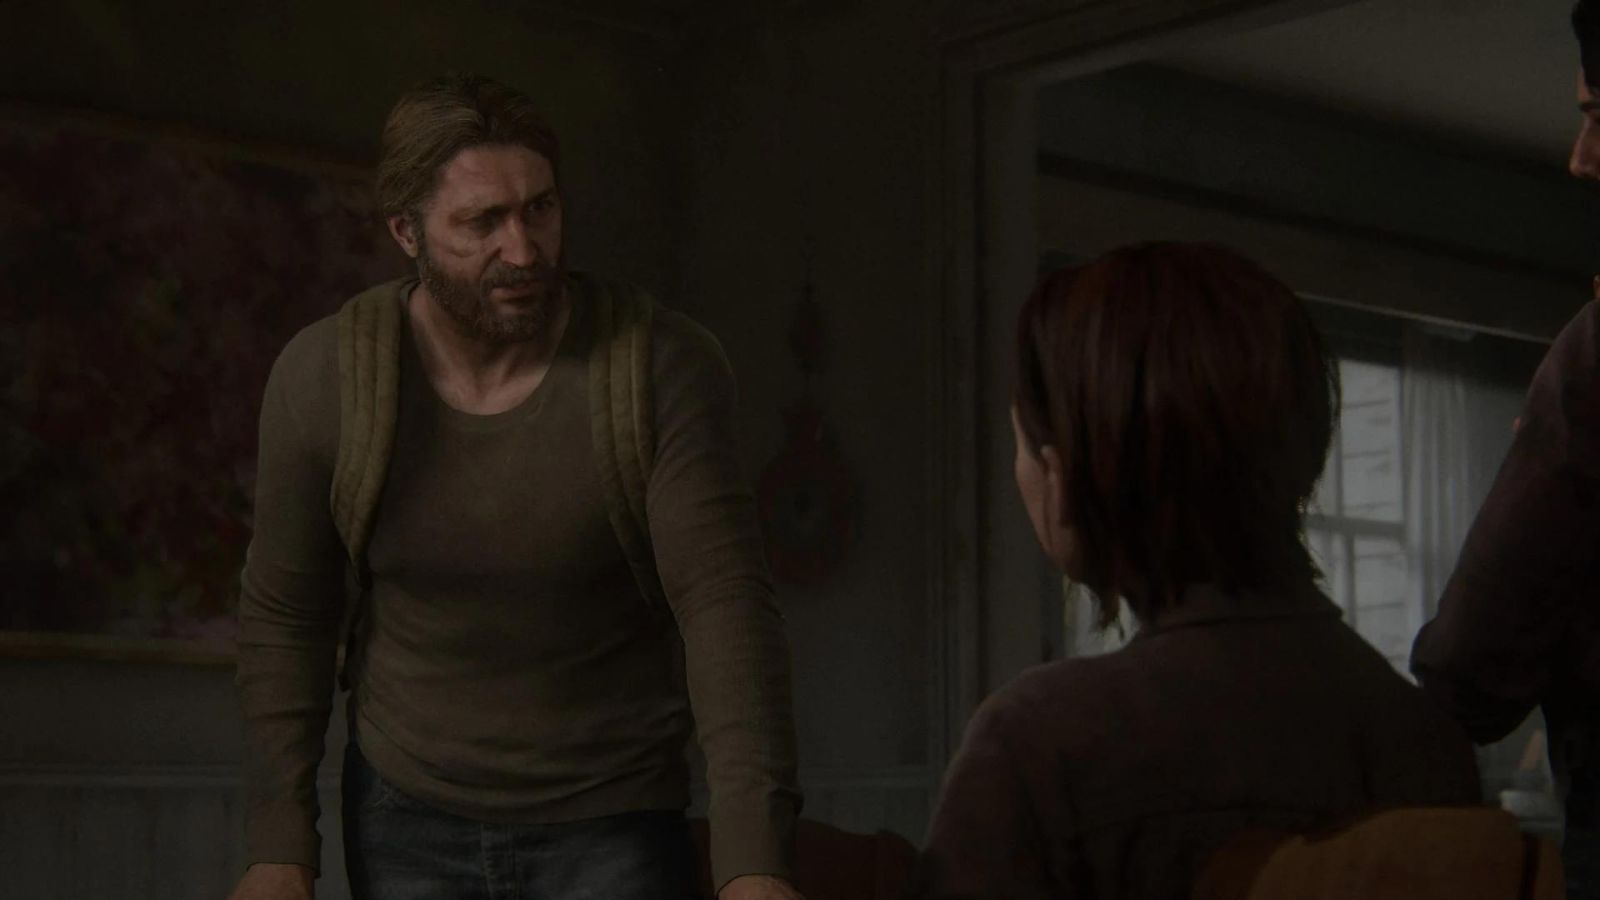 Canceled Last of Us Factions standalone game: Multiplayer details, concept  art, more - Dexerto